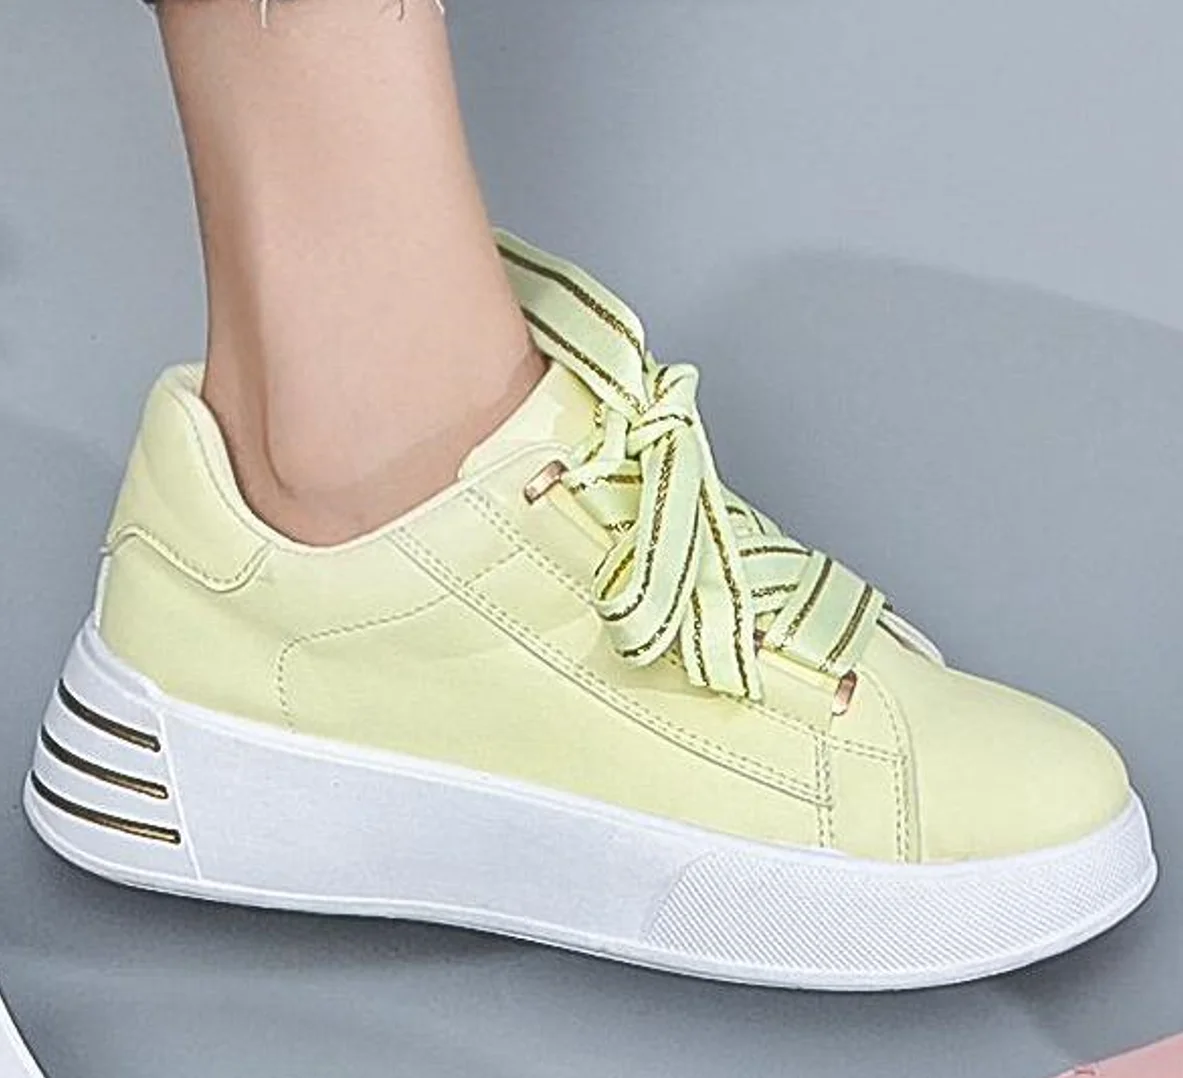 2022 Girl Ladies Flat Sport Shoes White Running Sneakers New Arrivals Girls Fashion Casual shoes